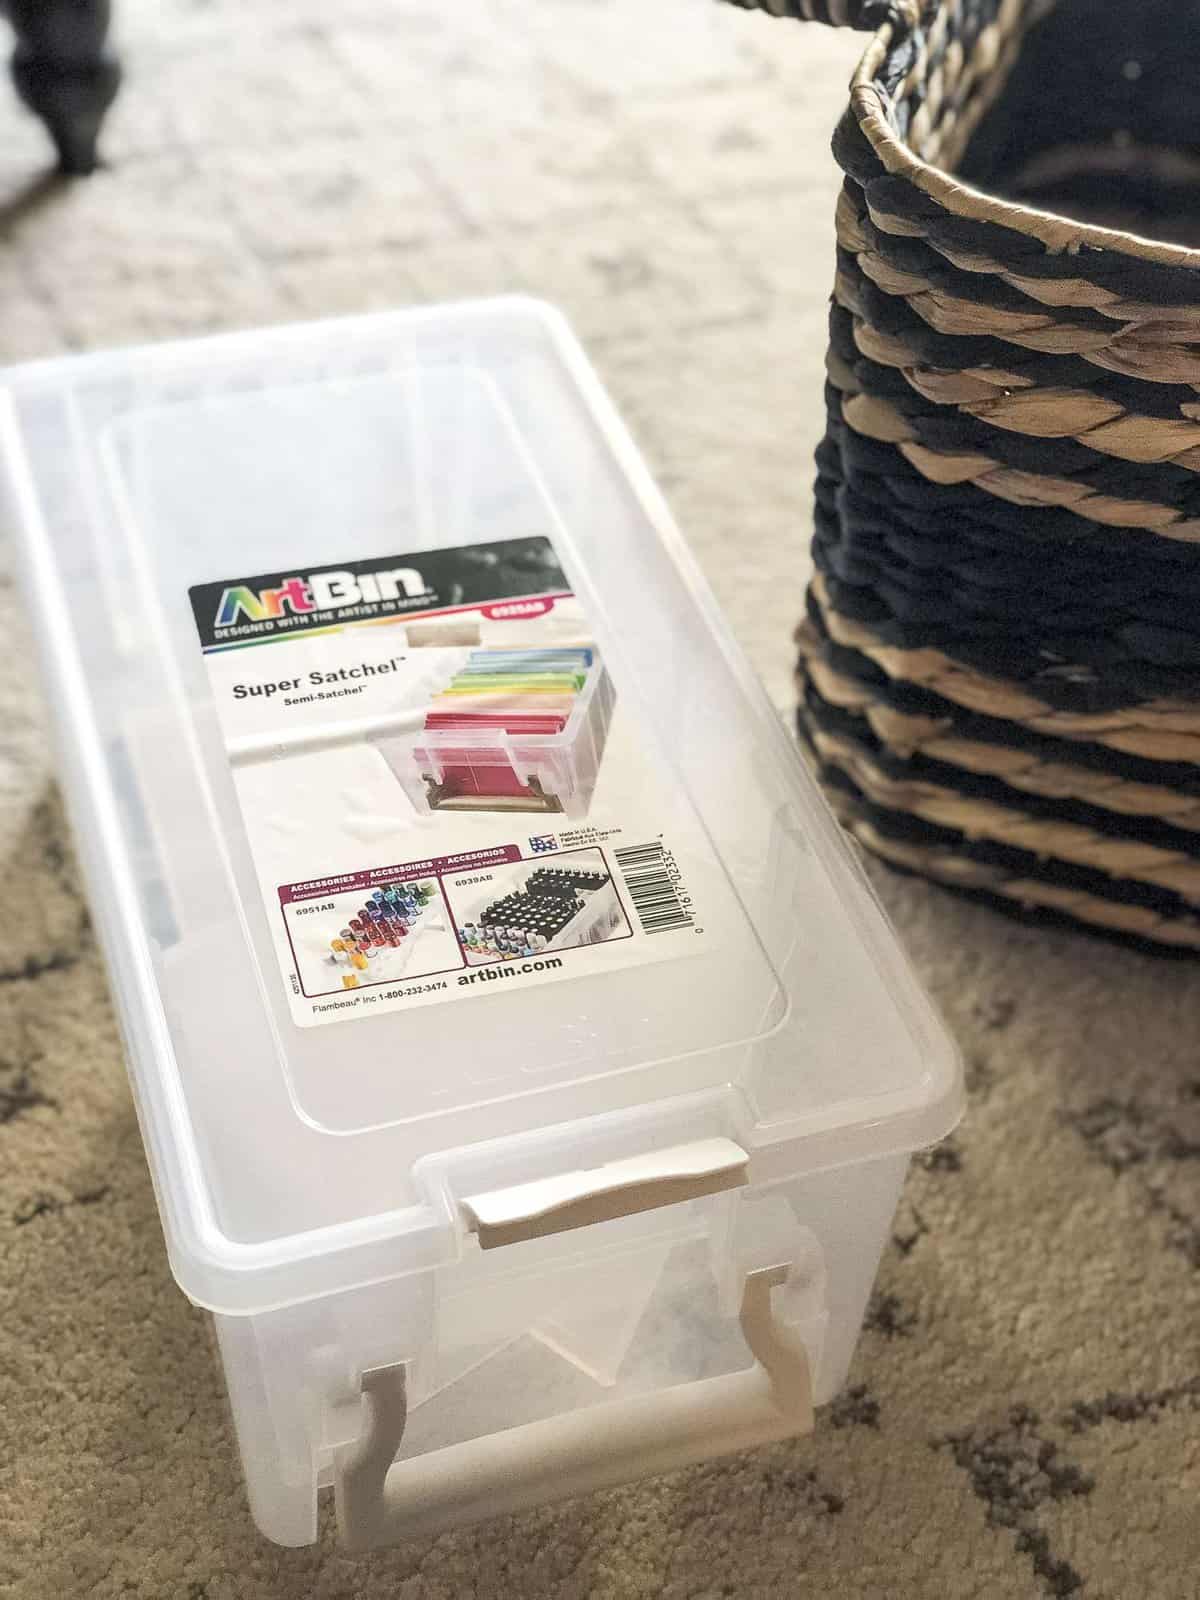 Do your kids love to be part of the action in your living areas? Today I'm sharing 2 simple ways to hide kid's craft storage in plain sight! #fromhousetohaven #craftstorage #toystorage